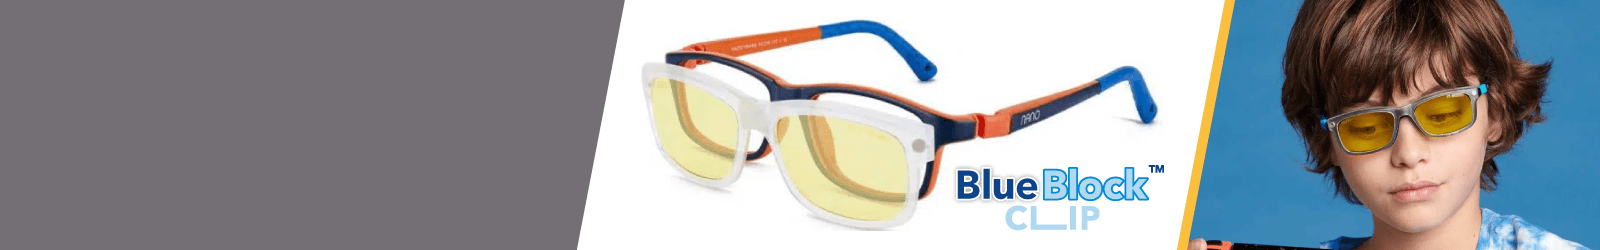 Nano Blue Block Clip Eyewear for Kids from 0 to 24-month-old